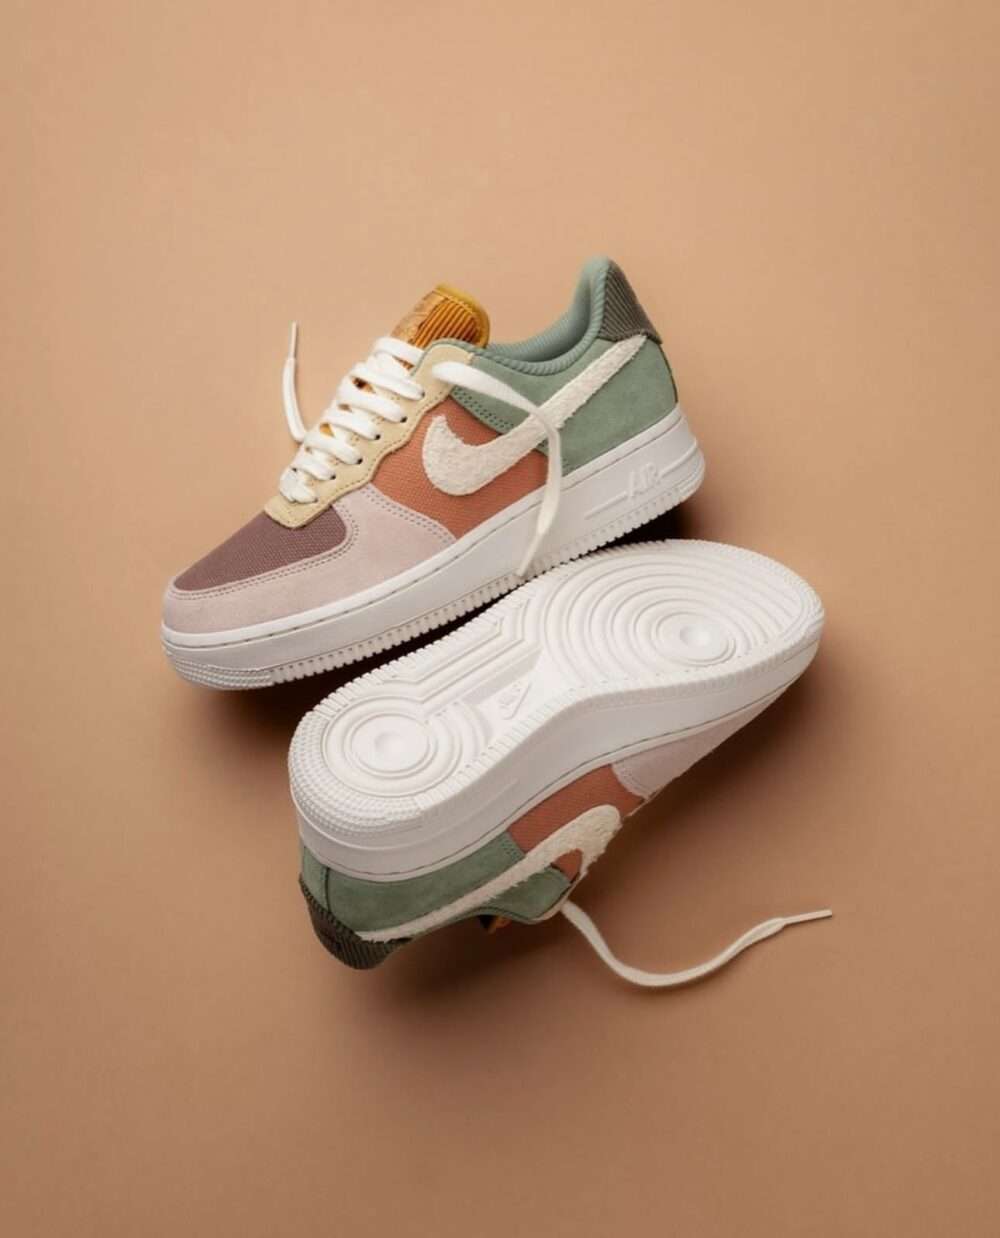 Buy First Copy Nike Airforce 1 Oil Green Shoes Online India